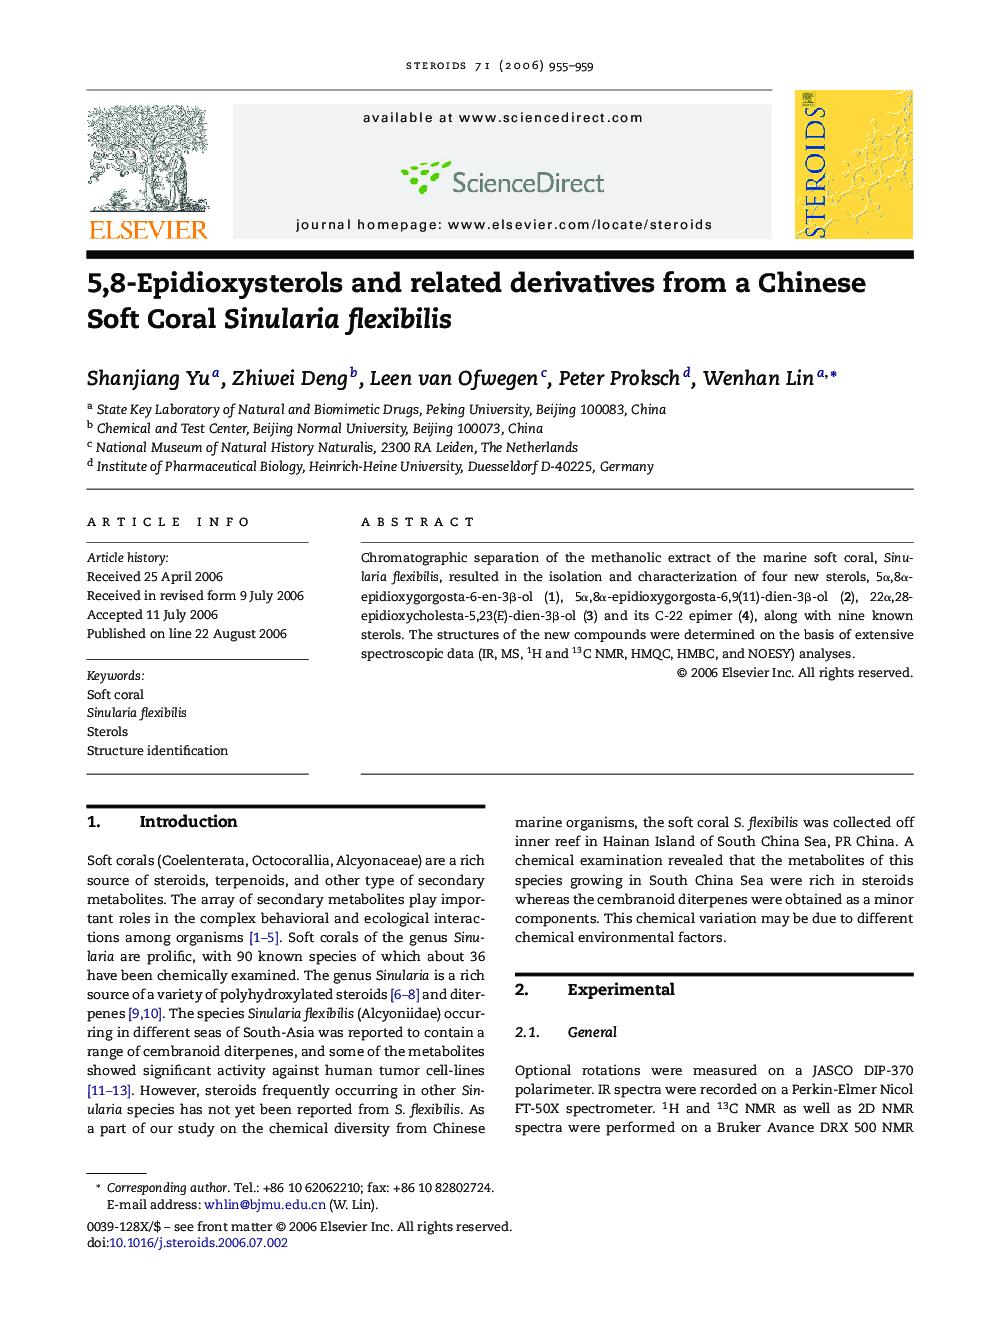 5,8-Epidioxysterols and related derivatives from a Chinese Soft Coral Sinularia flexibilis